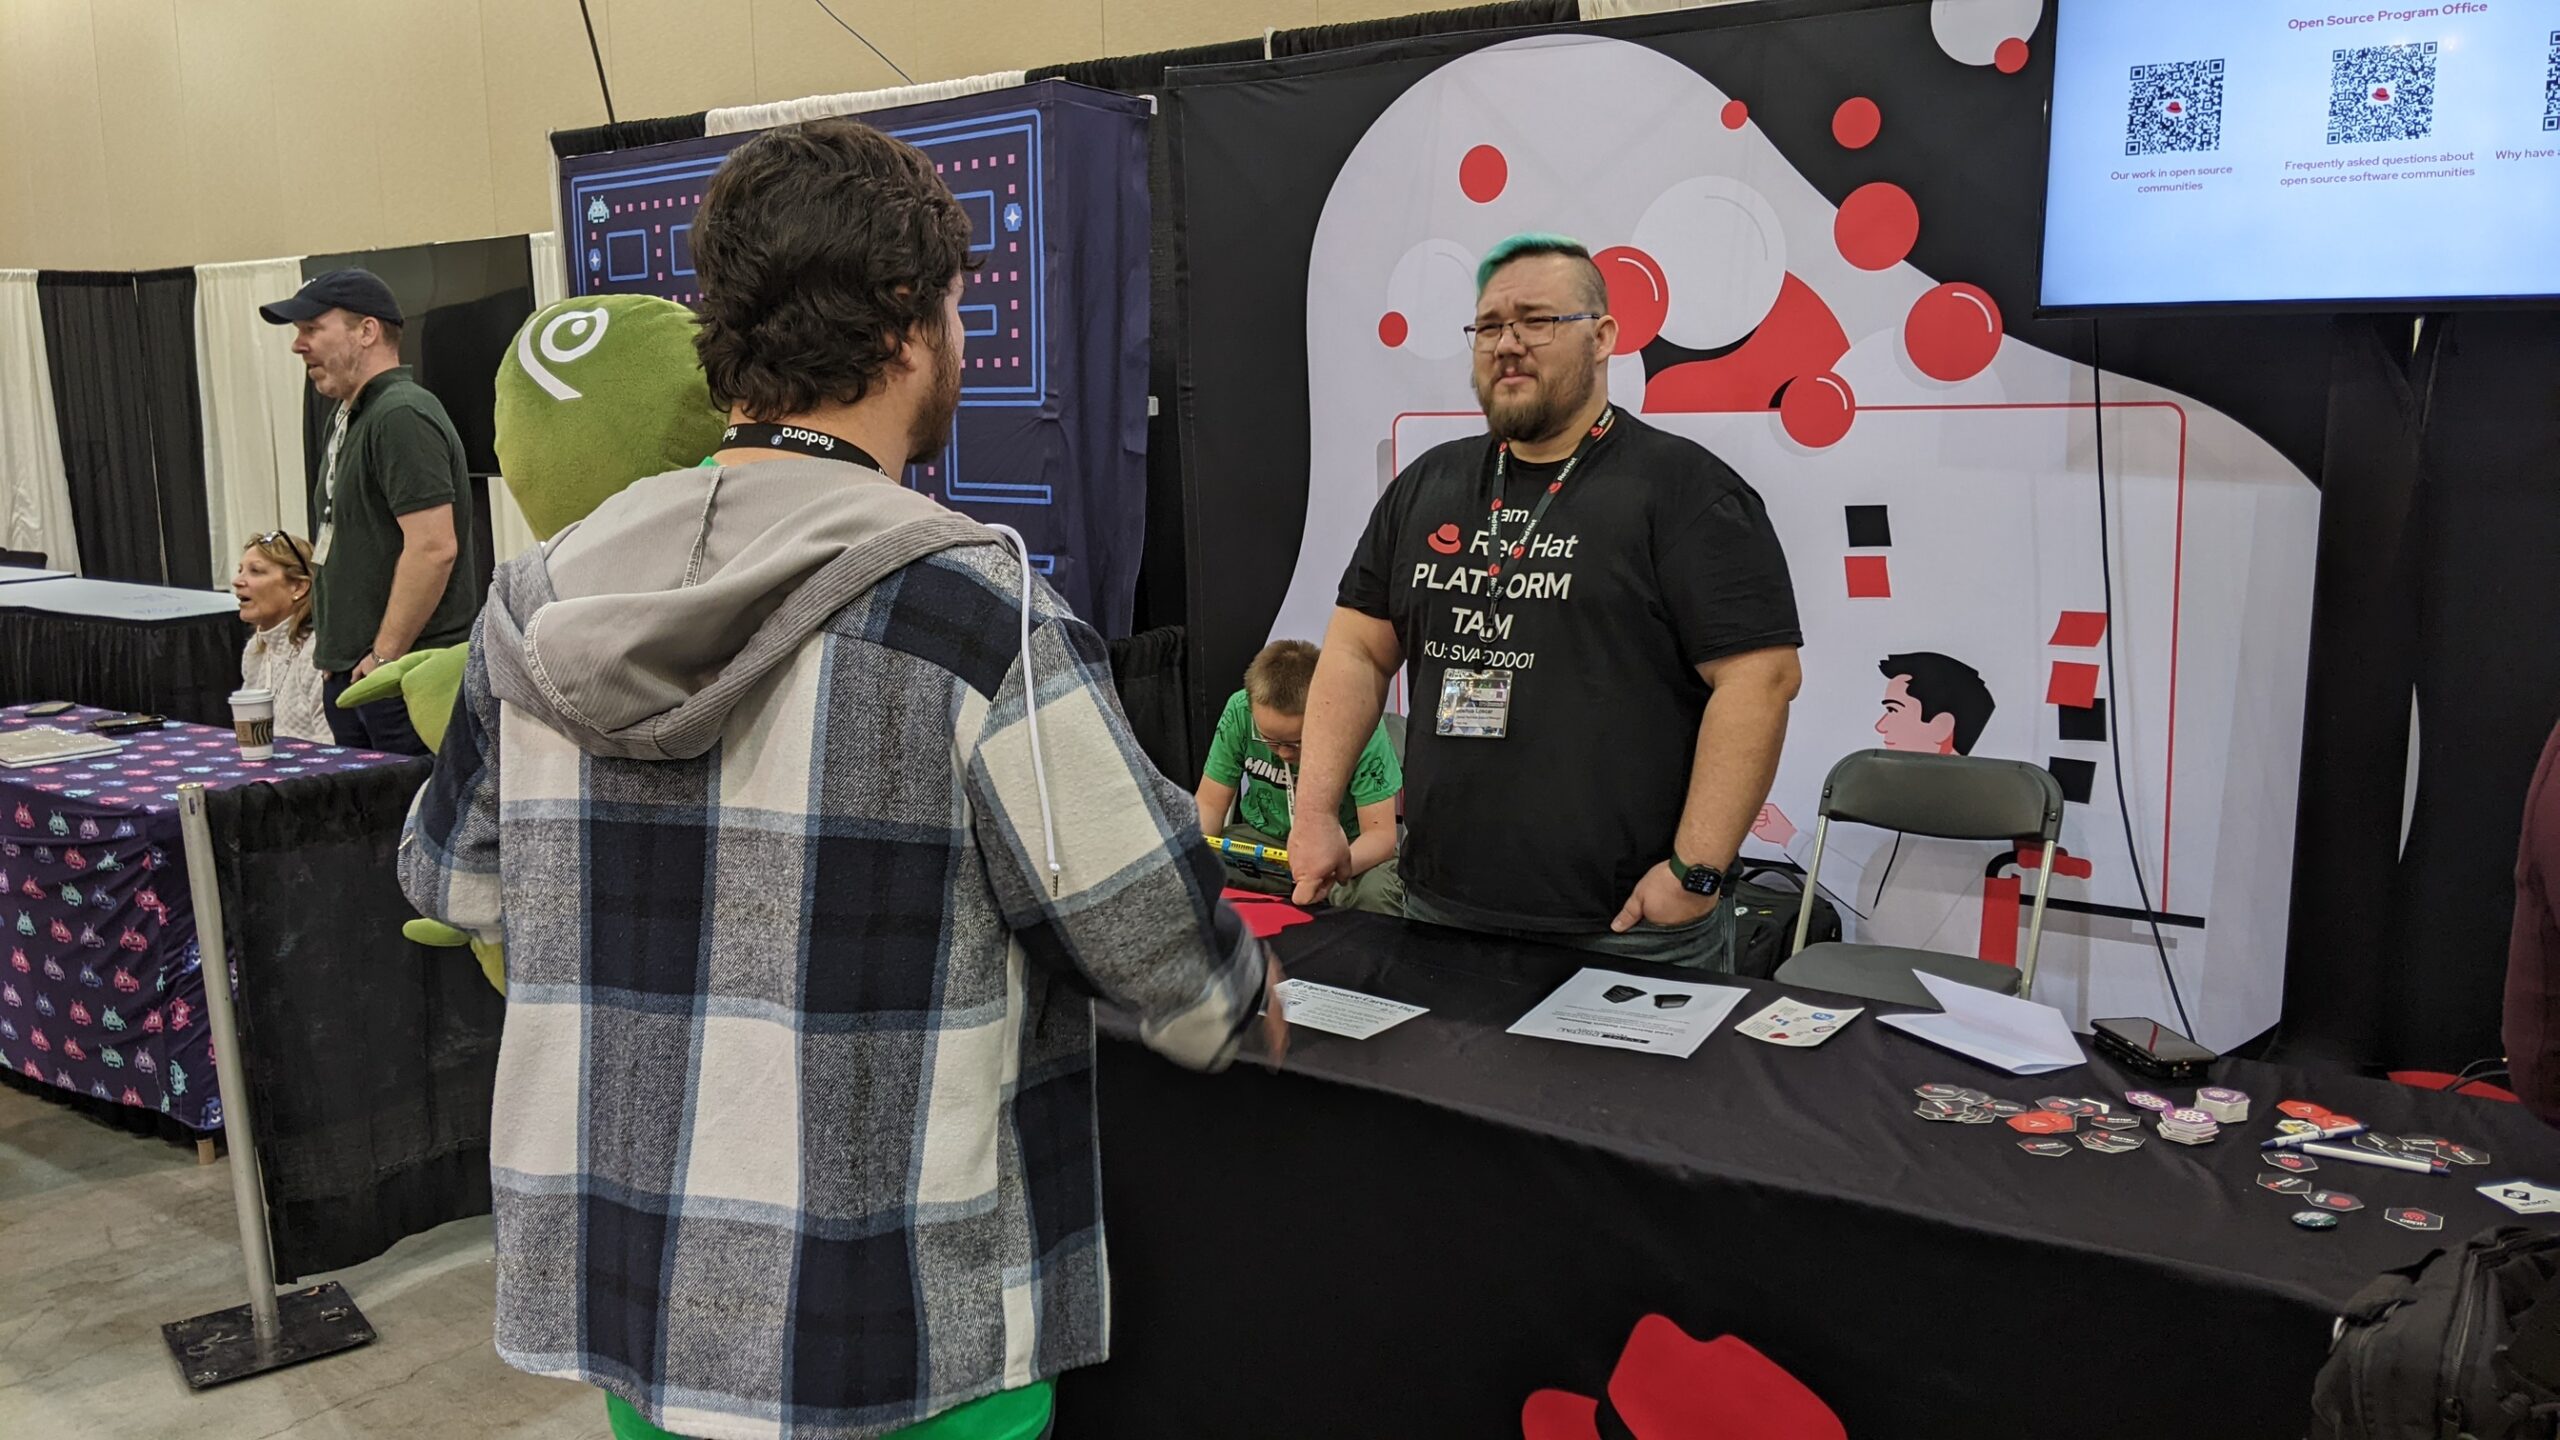 Scott Williams chats with Joshua Loscar at the Red Hat Booth